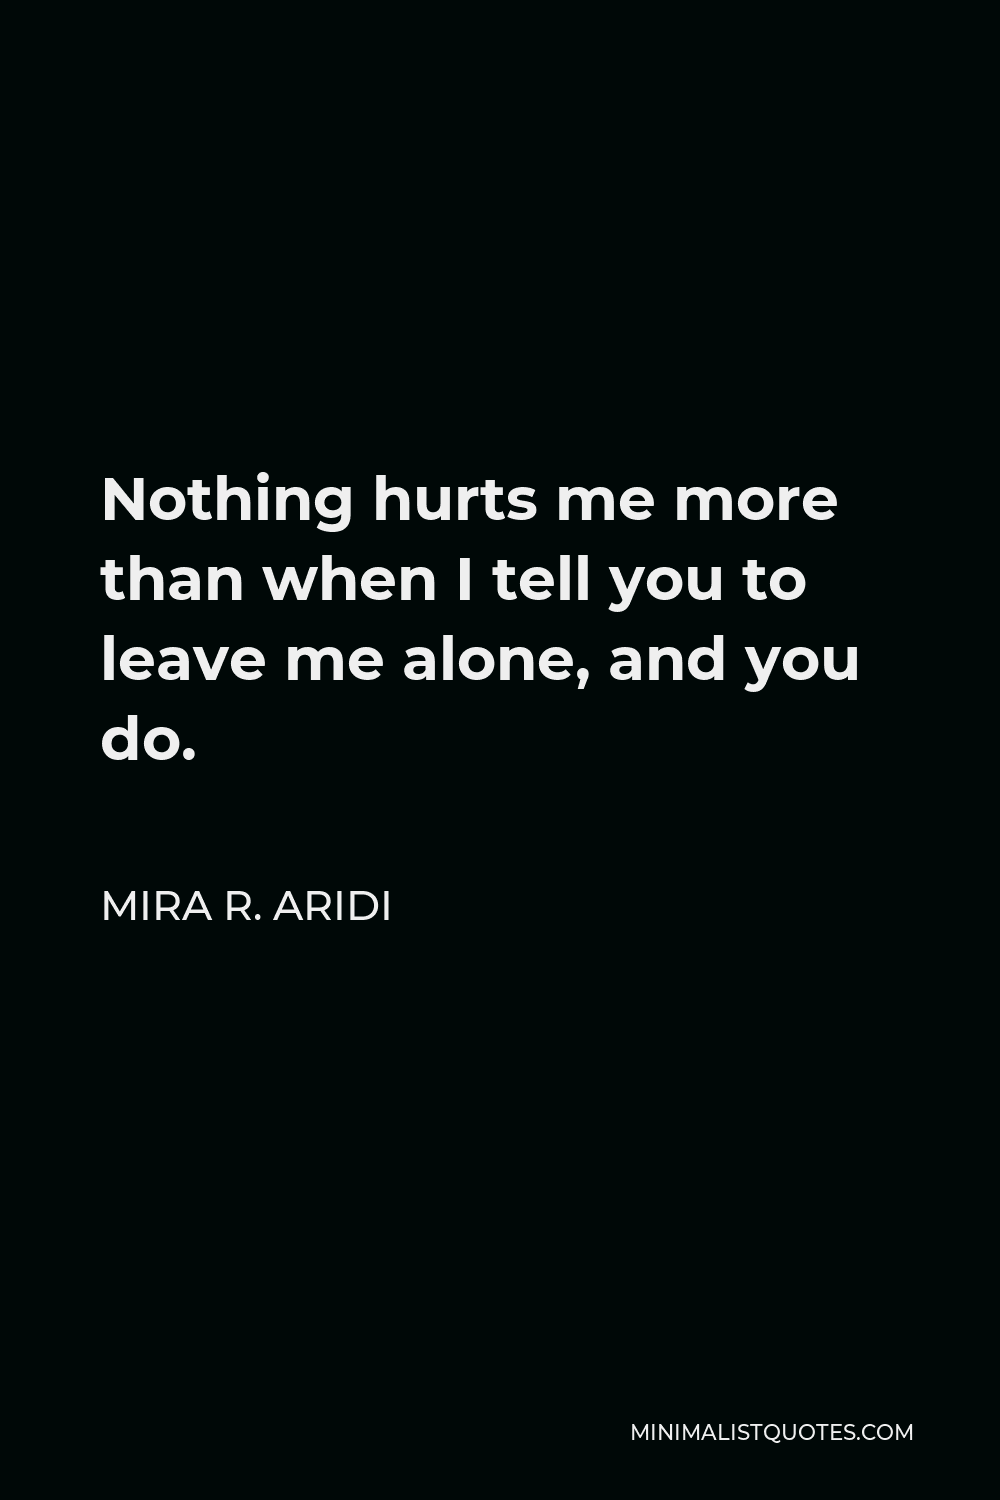 Mira R. Aridi Quote - Nothing hurts me more than when I tell you to leave me alone, and you do.